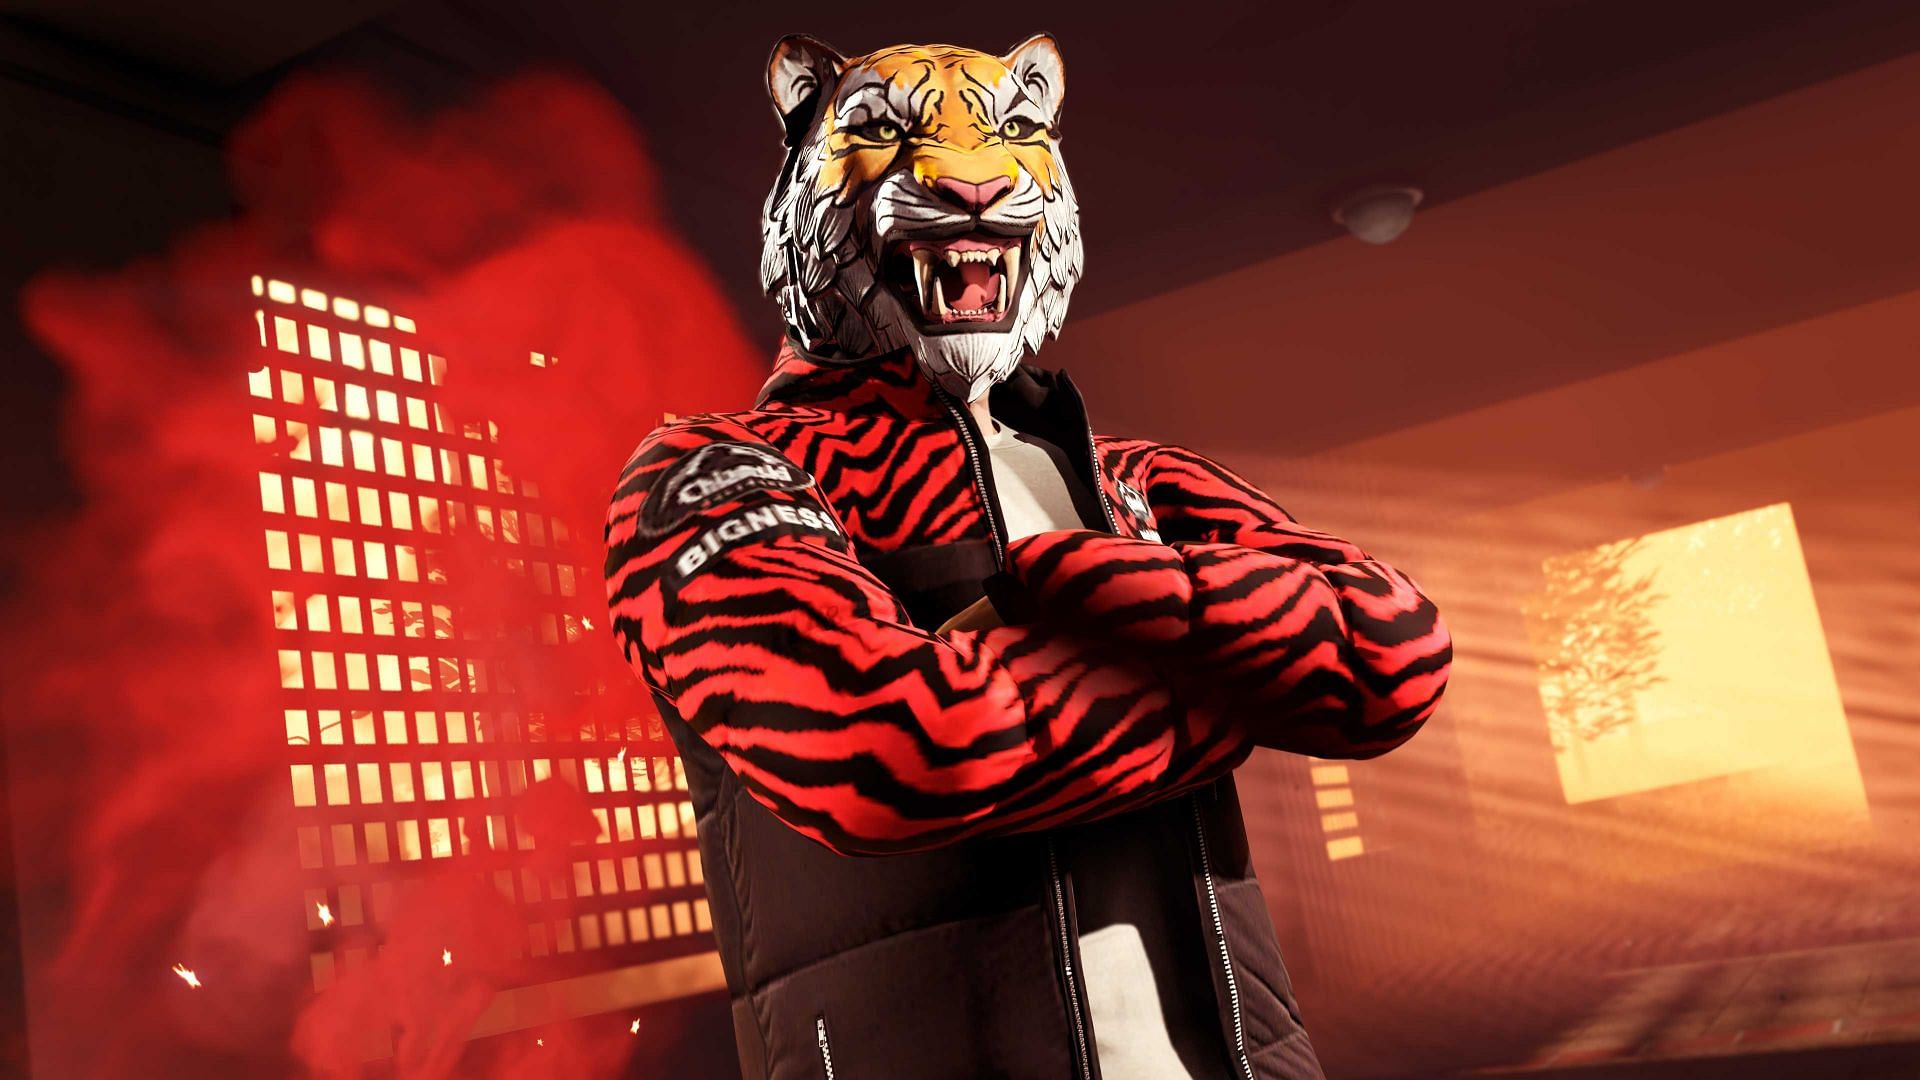 This is the Painted Tiger Mask